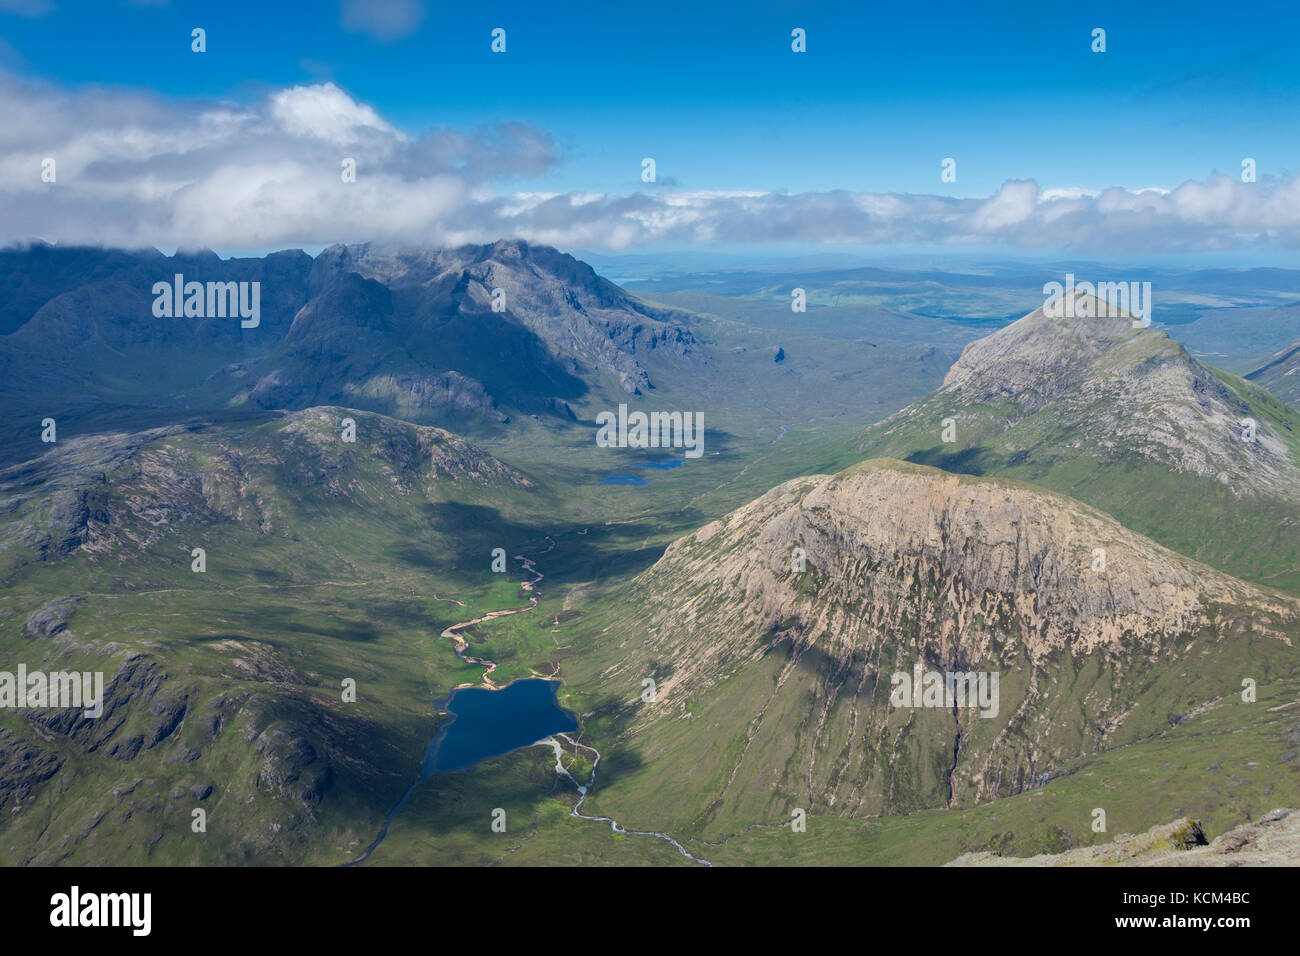 Glen Sligachan and the Cuillins from Bla Bheinn.  Loch an Athain in the foreground with Ruadh Stac and Marsco to the right, Isle of Skye, Scotland, UK Stock Photo